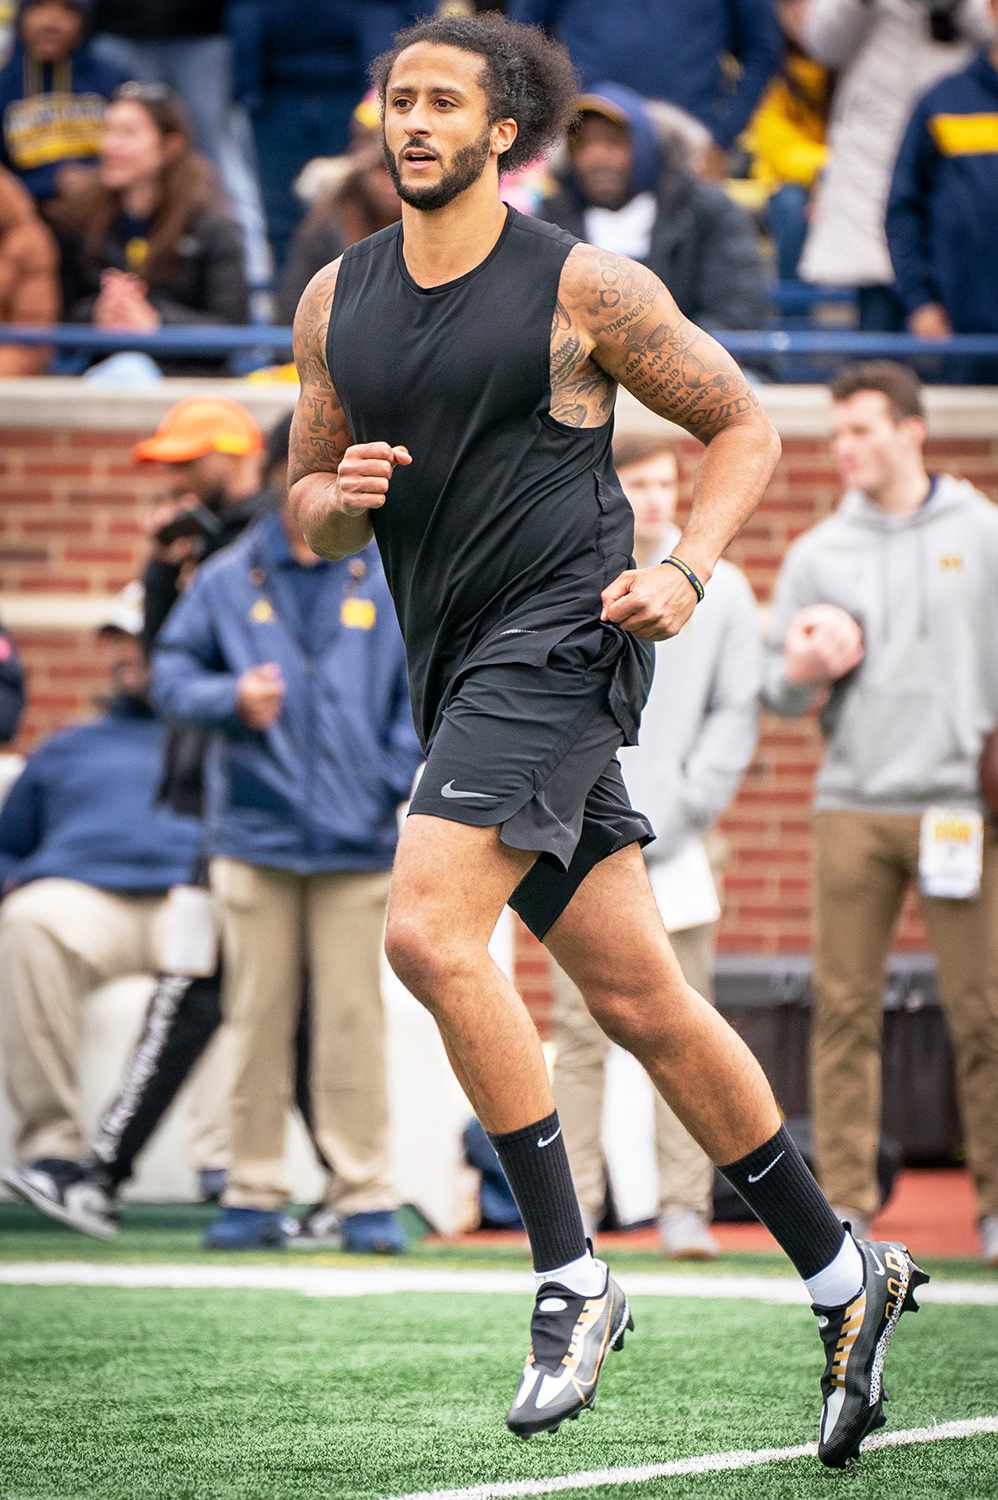 Colin Kaepernick participates in a throwing exhibition during half time of the Michigan spring football game at Michigan Stadium on April 2, 2022 in Ann Arbor, Michigan.